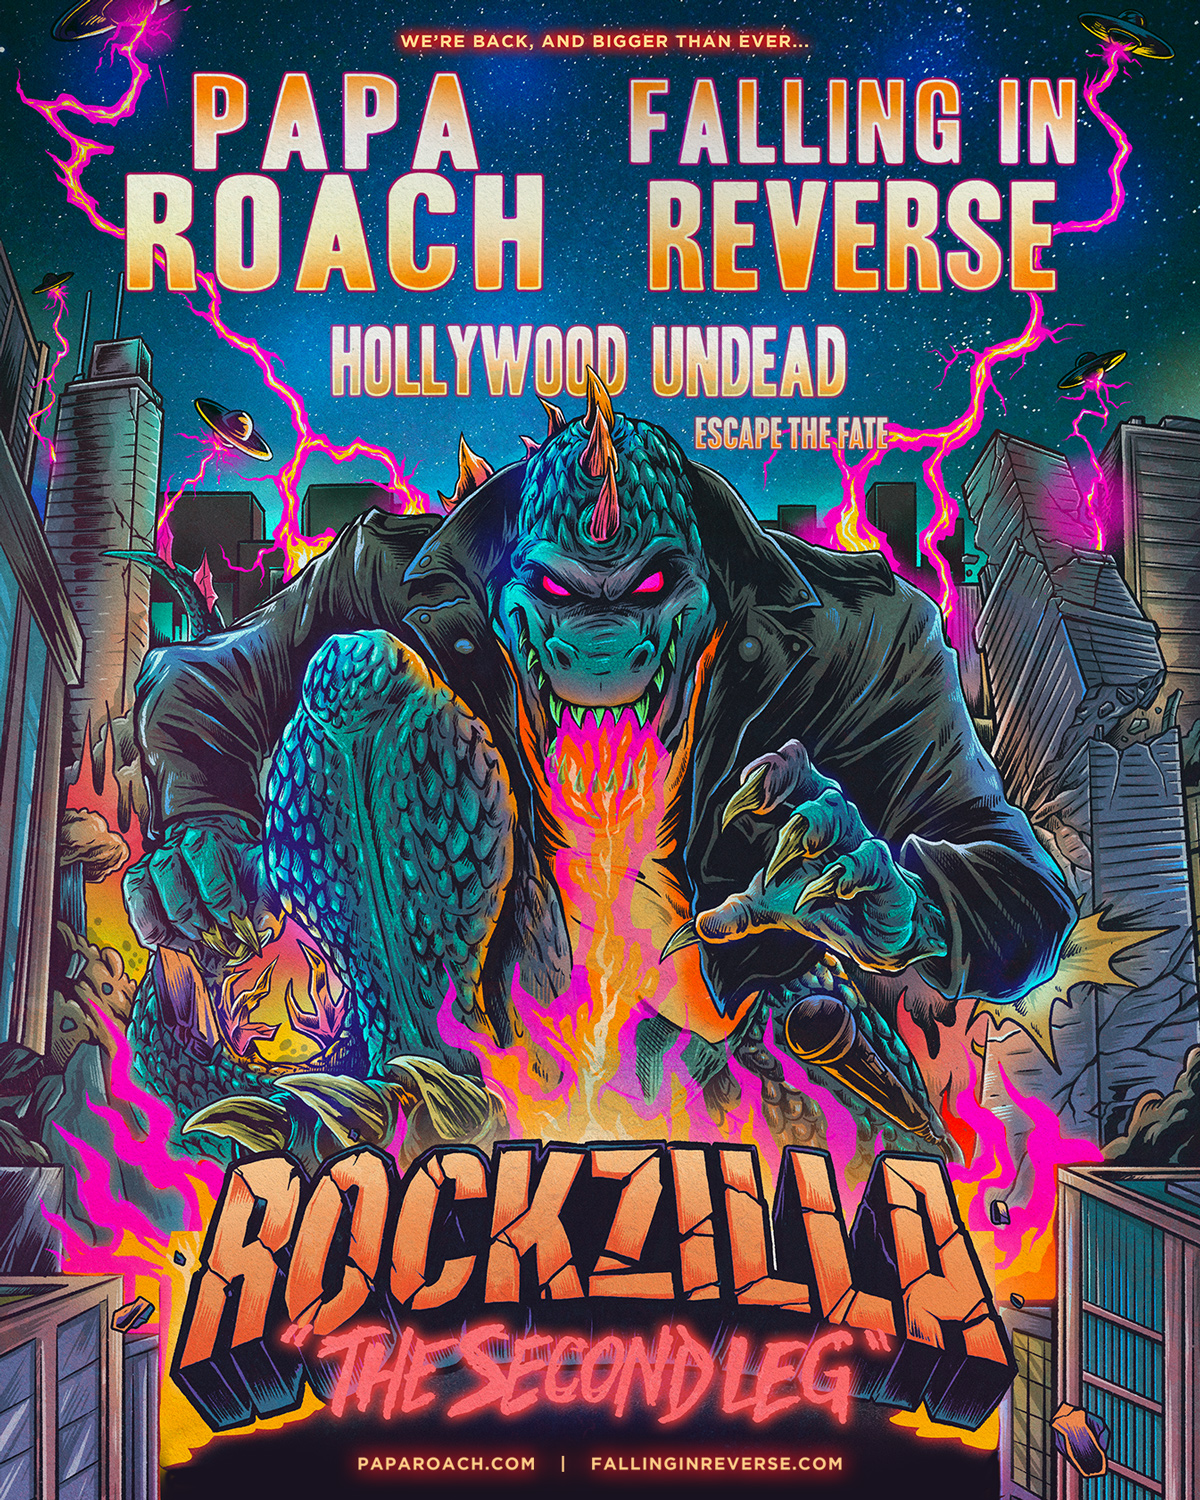 Papa Roach and Falling In Reverse Announce Rockzilla: The Second Leg